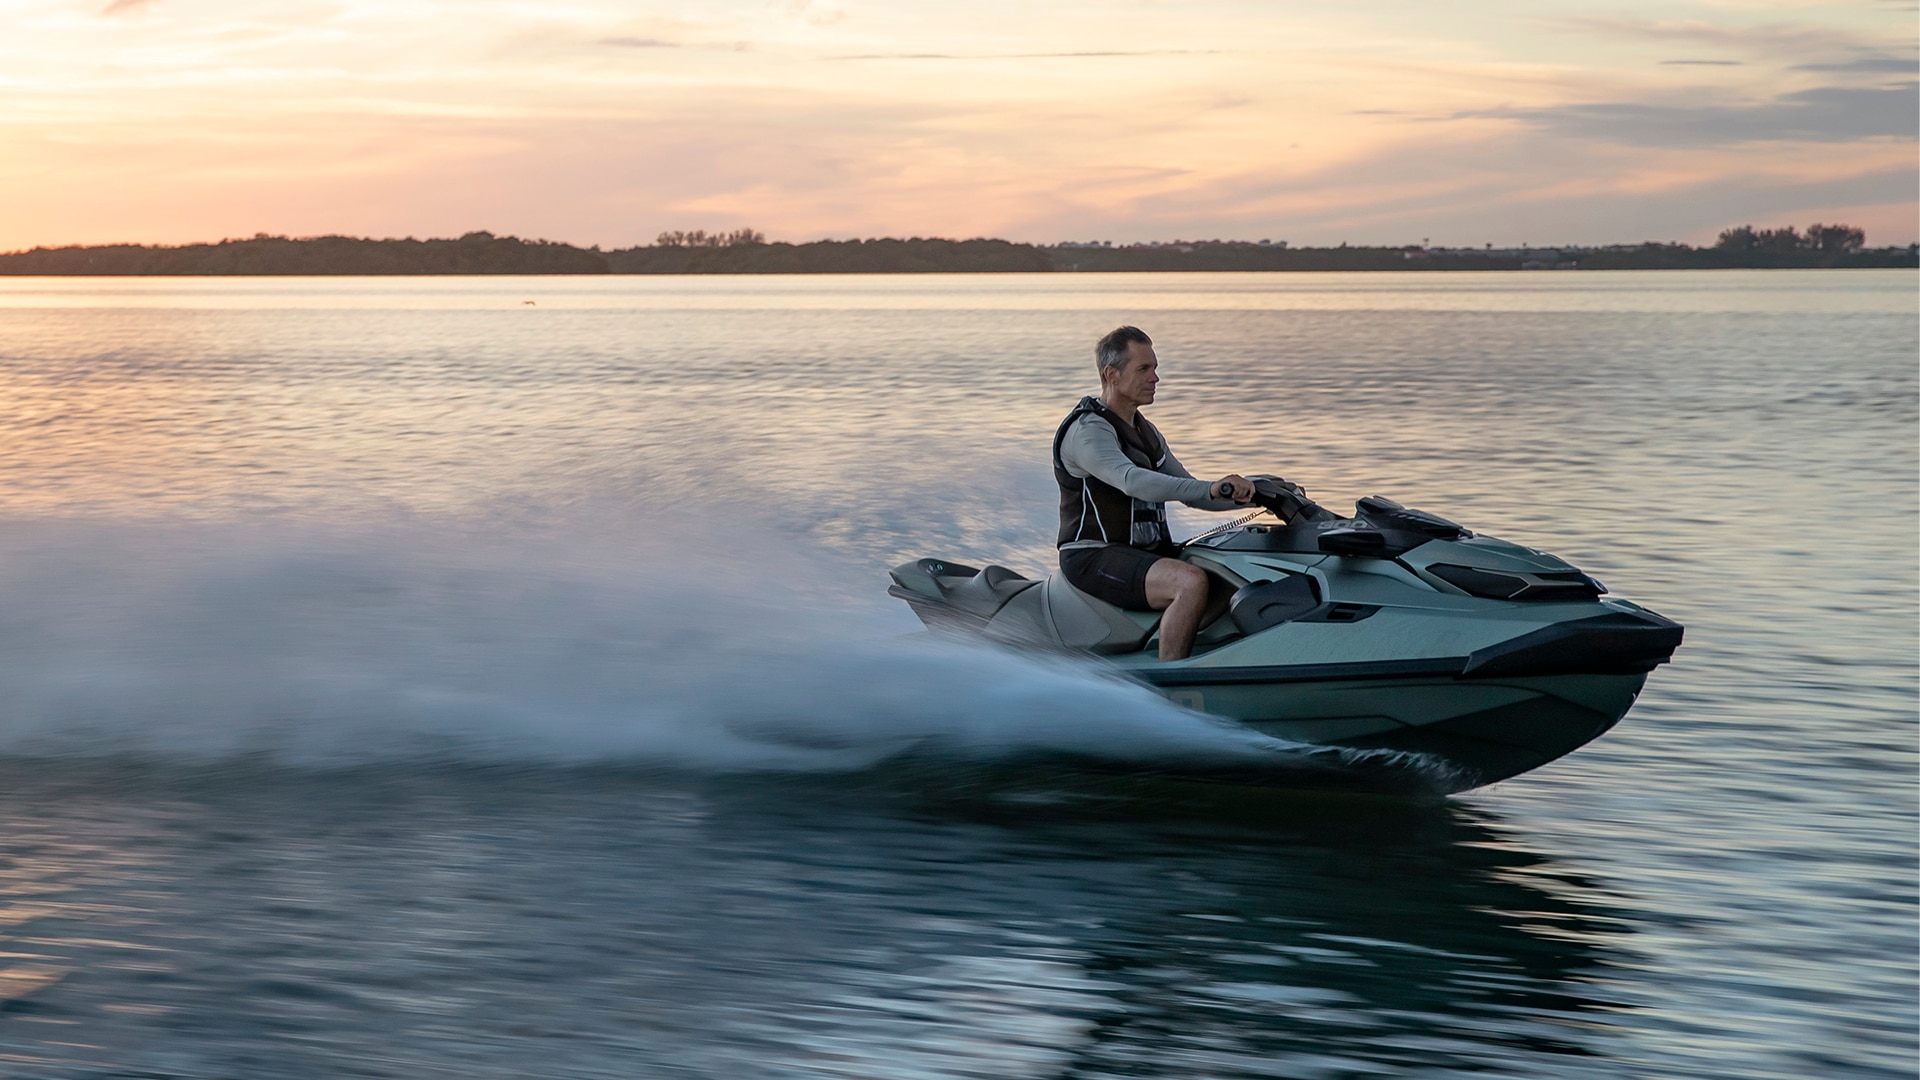 Rider driving a GTX limited personal watercraft from Sea-Doo